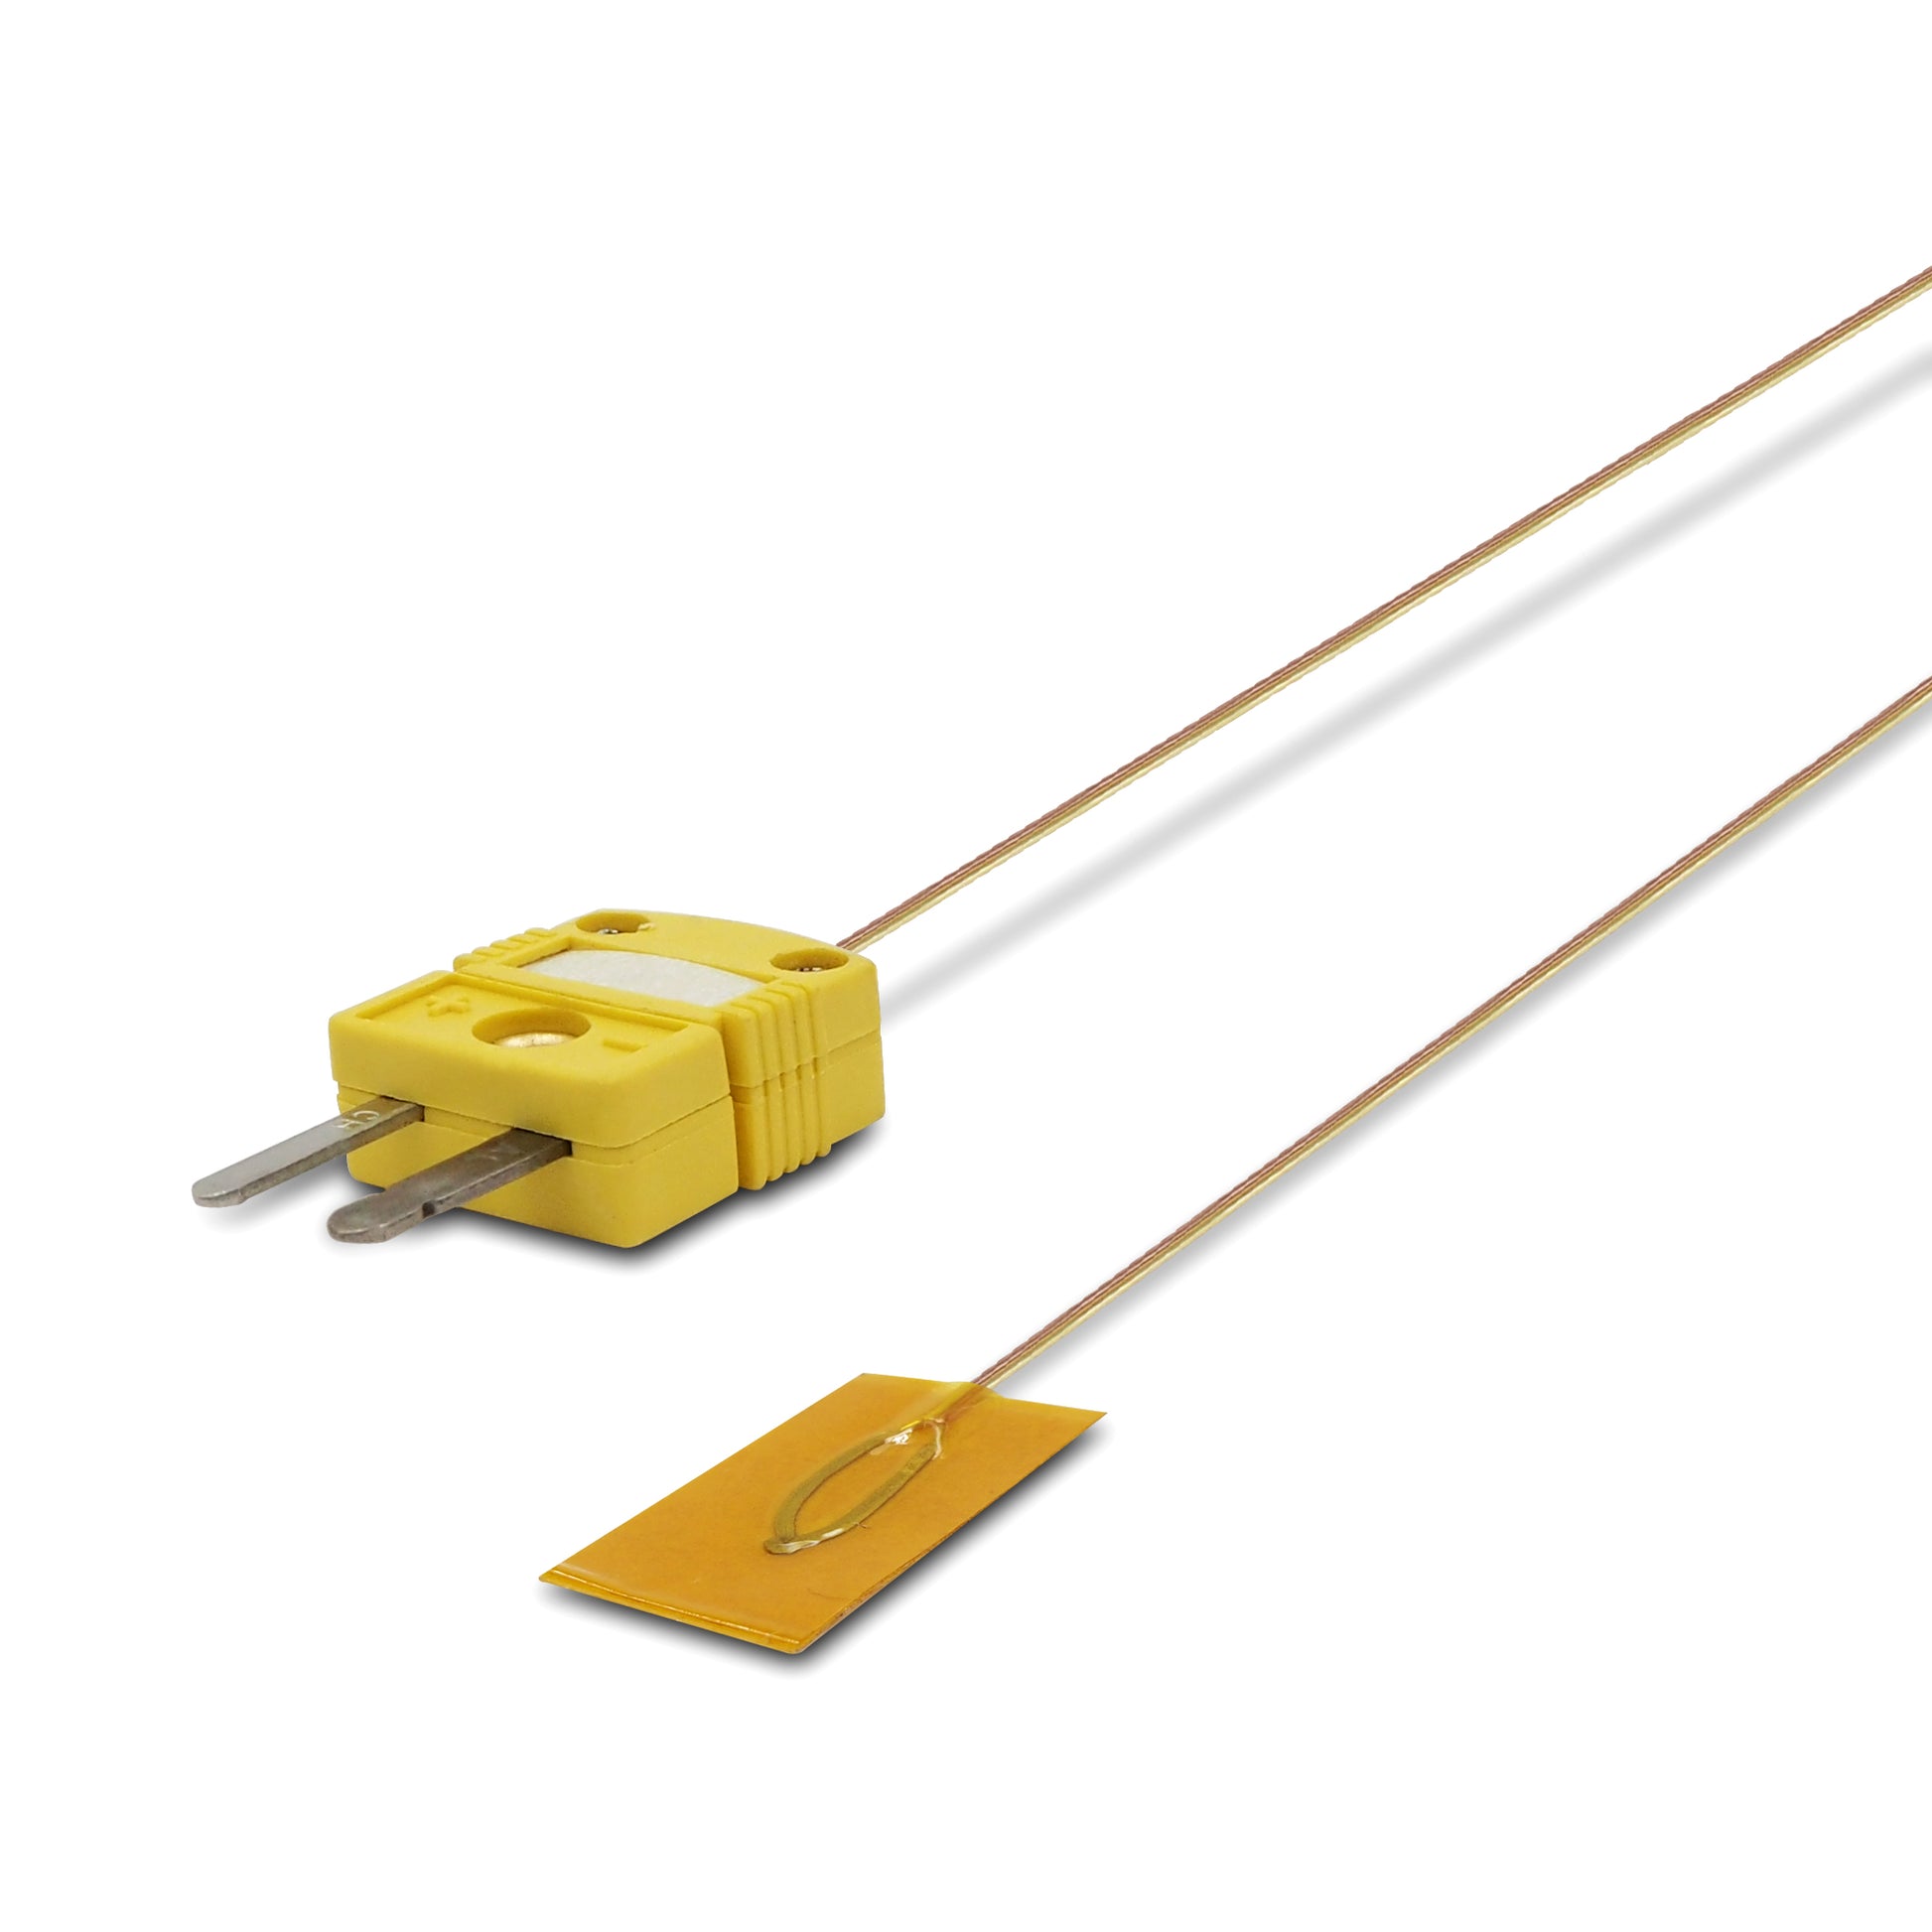 Surface Contact 0.25 mm diameter K-Type Sensor Probe with Sticker for K-Type Thermocouple, Yellow Cable, Flat View